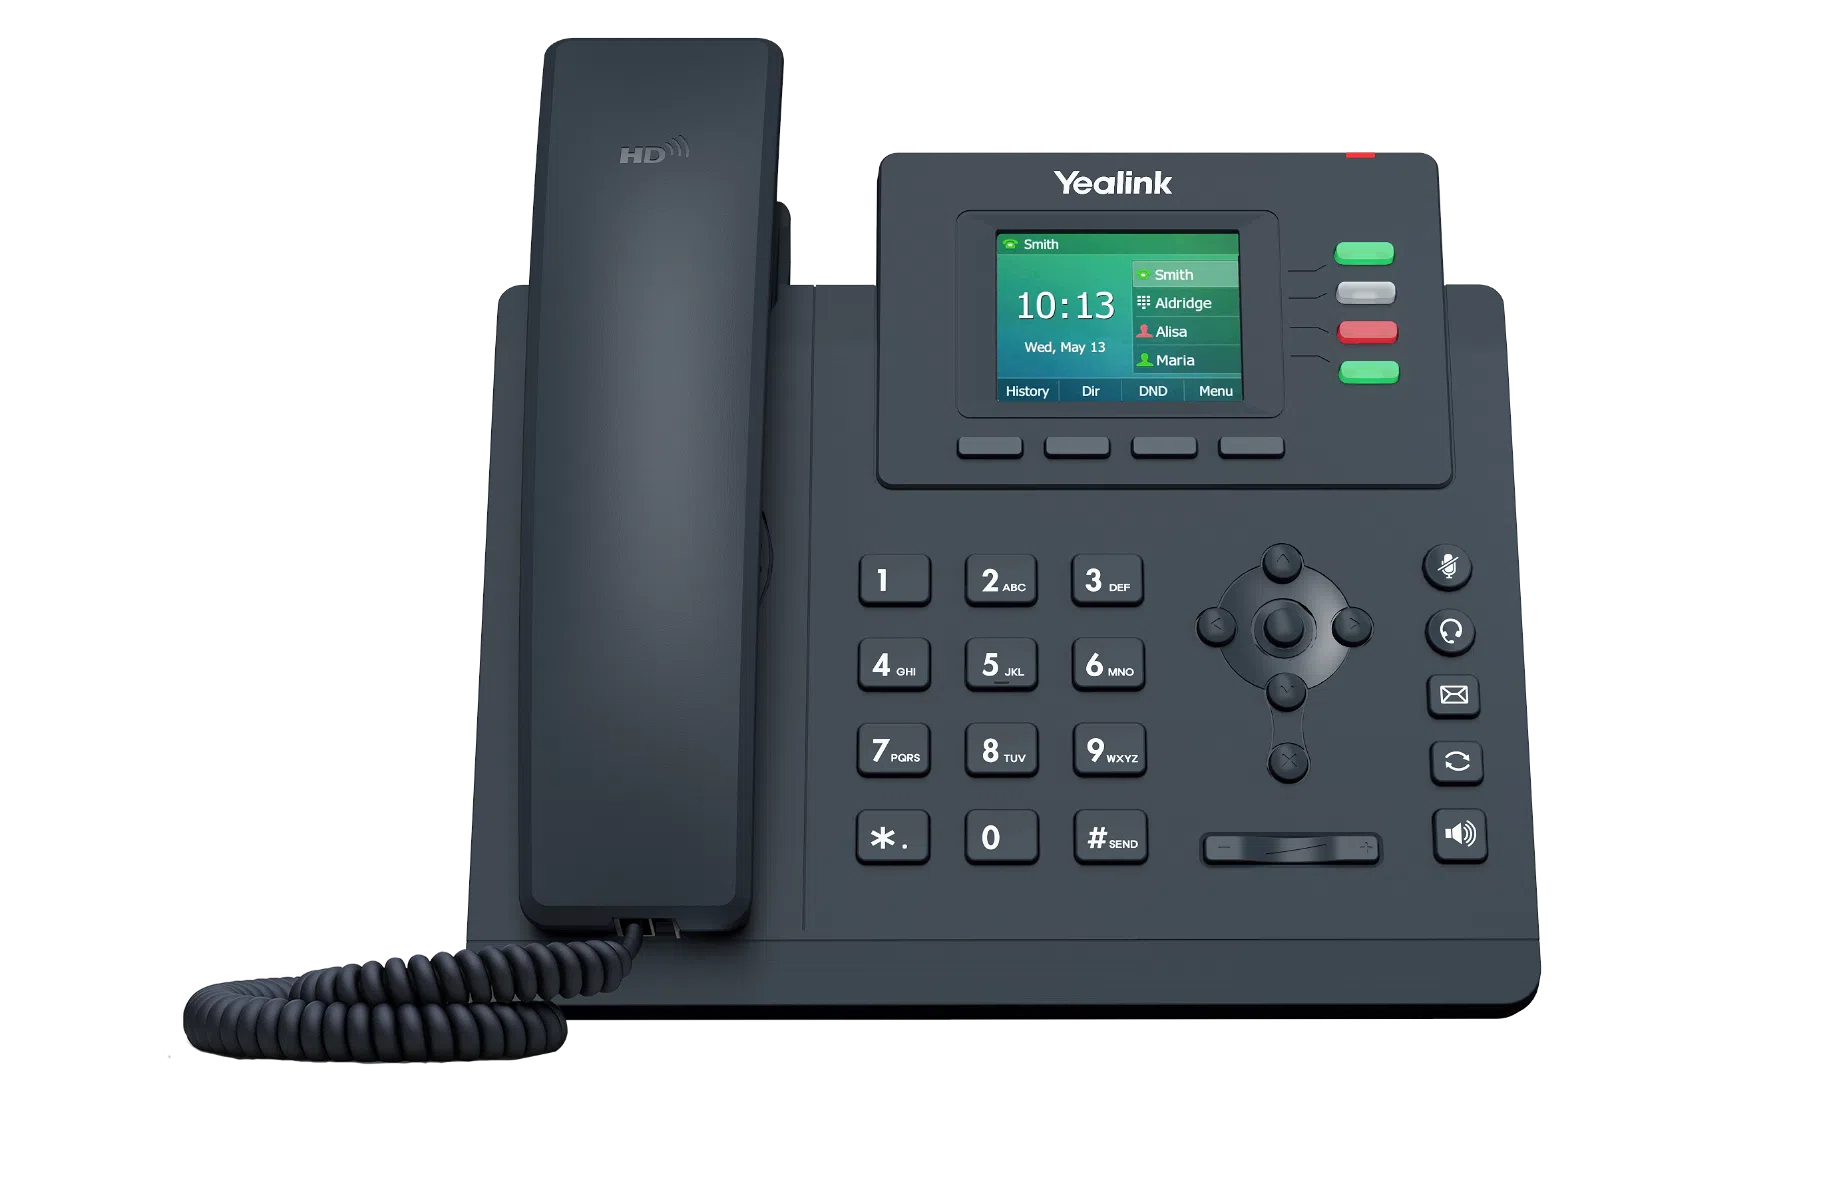 Can you provide the UPC for the Yealink T33G Entry Level Gigabit PoE Color IP Phone?